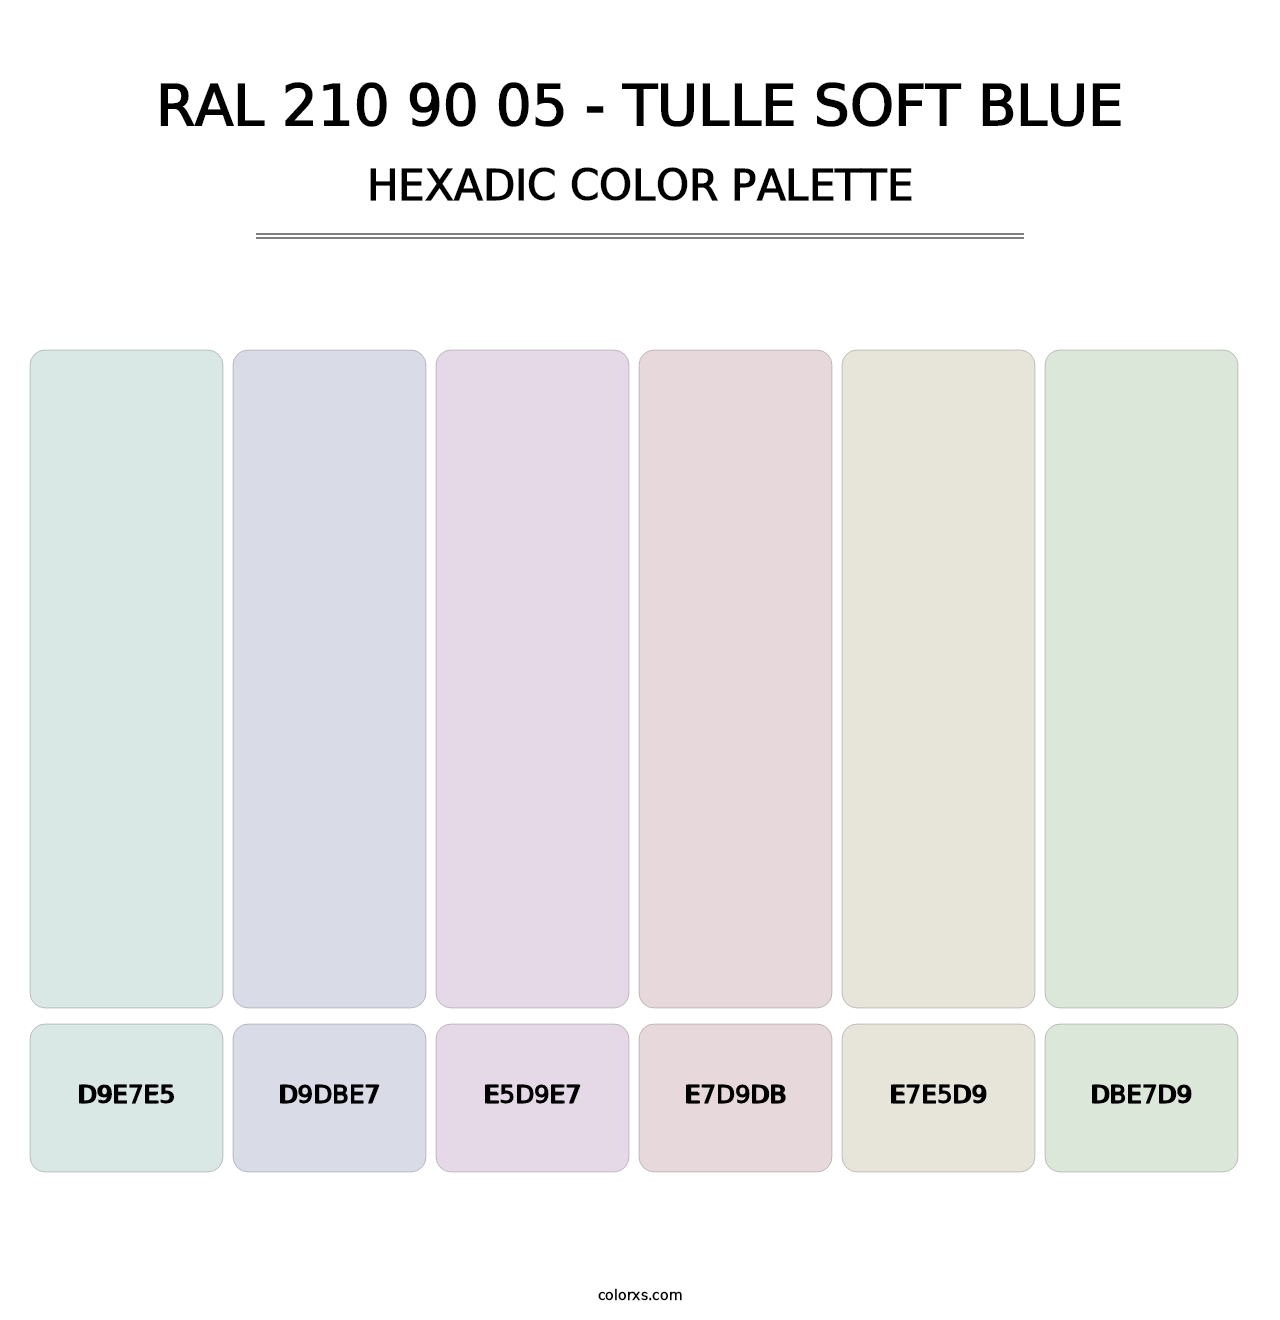 RAL 210 90 05 - Tulle Soft Blue - Hexadic Color Palette